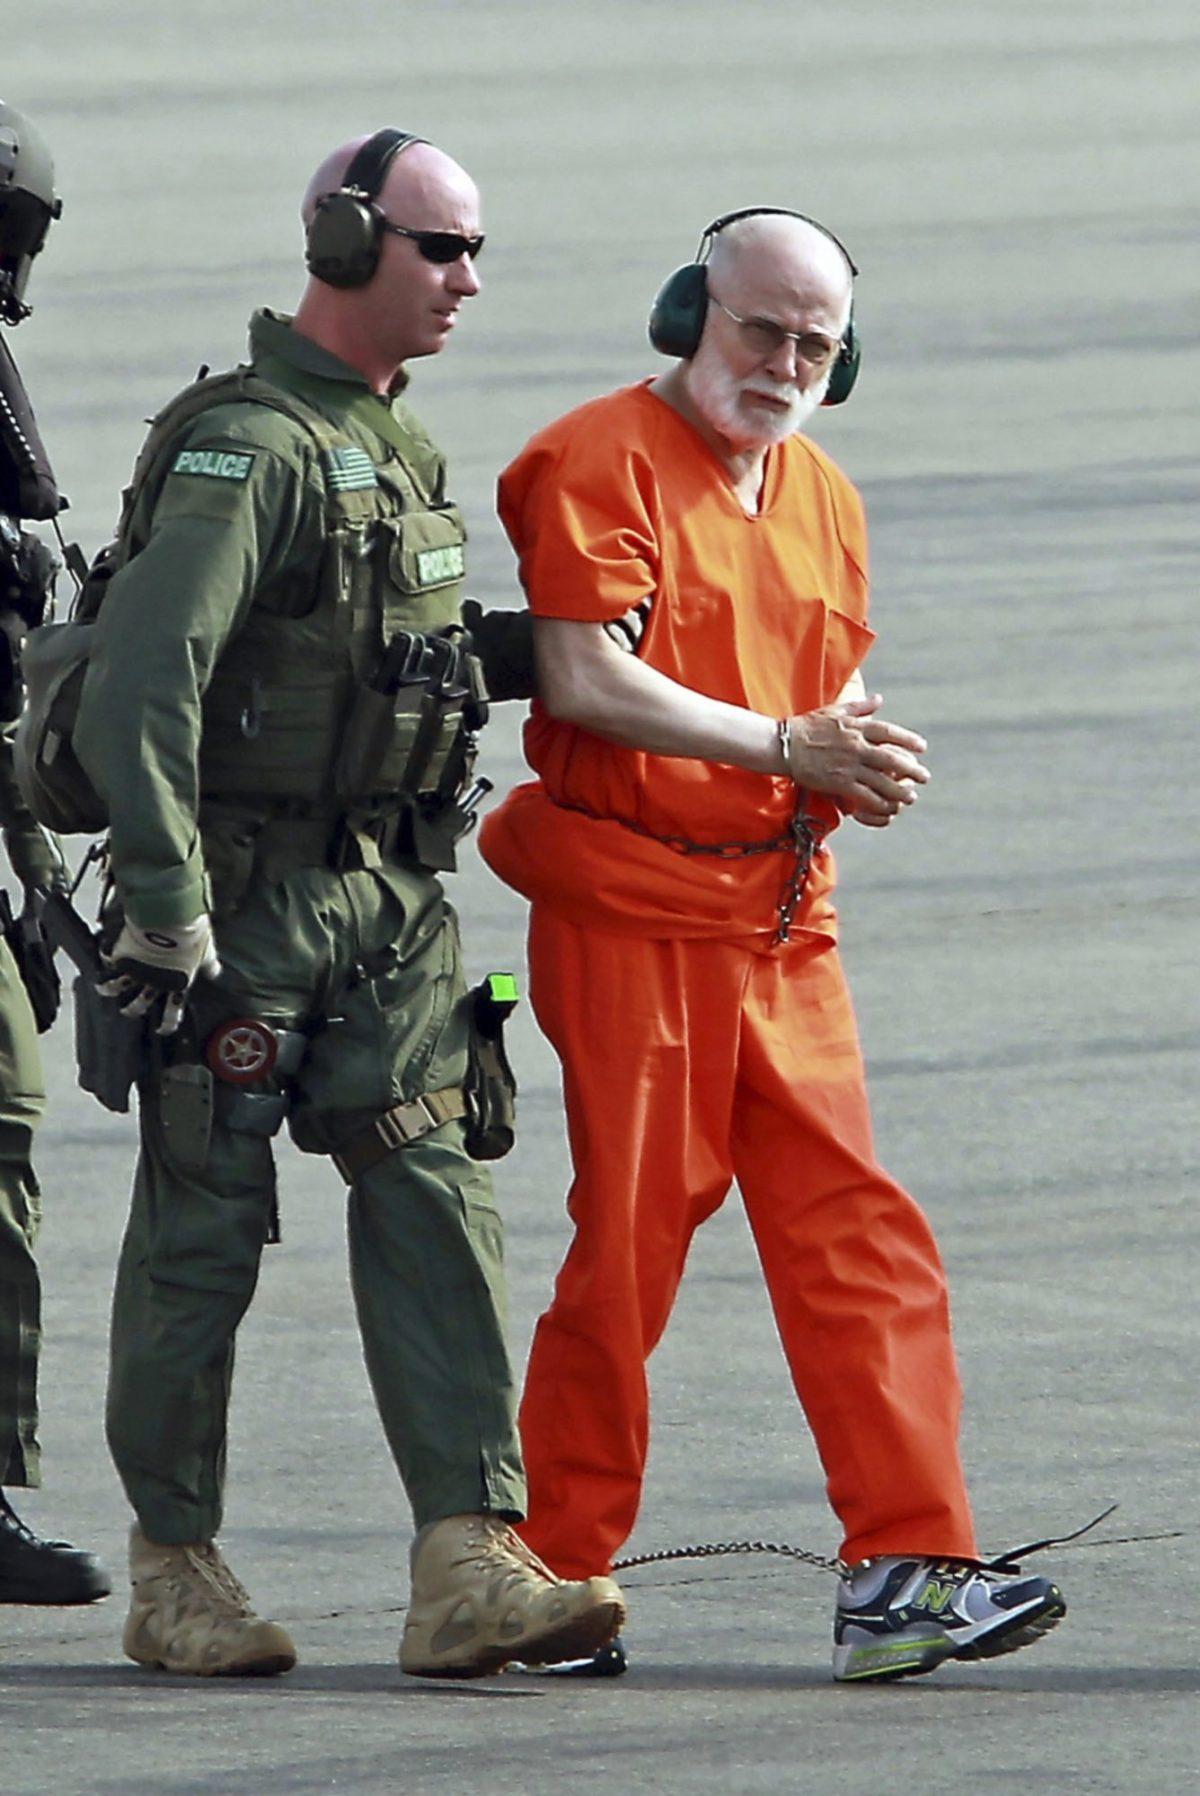 James "Whitey" Bulger, right, is escorted from a U.S. Coast Guard helicopter to a waiting vehicle at an airport in Plymouth, Mass., after attending hearings in federal court in Boston, on June 30, 2011. (Stuart Cahill/The Boston Herald via AP, File)